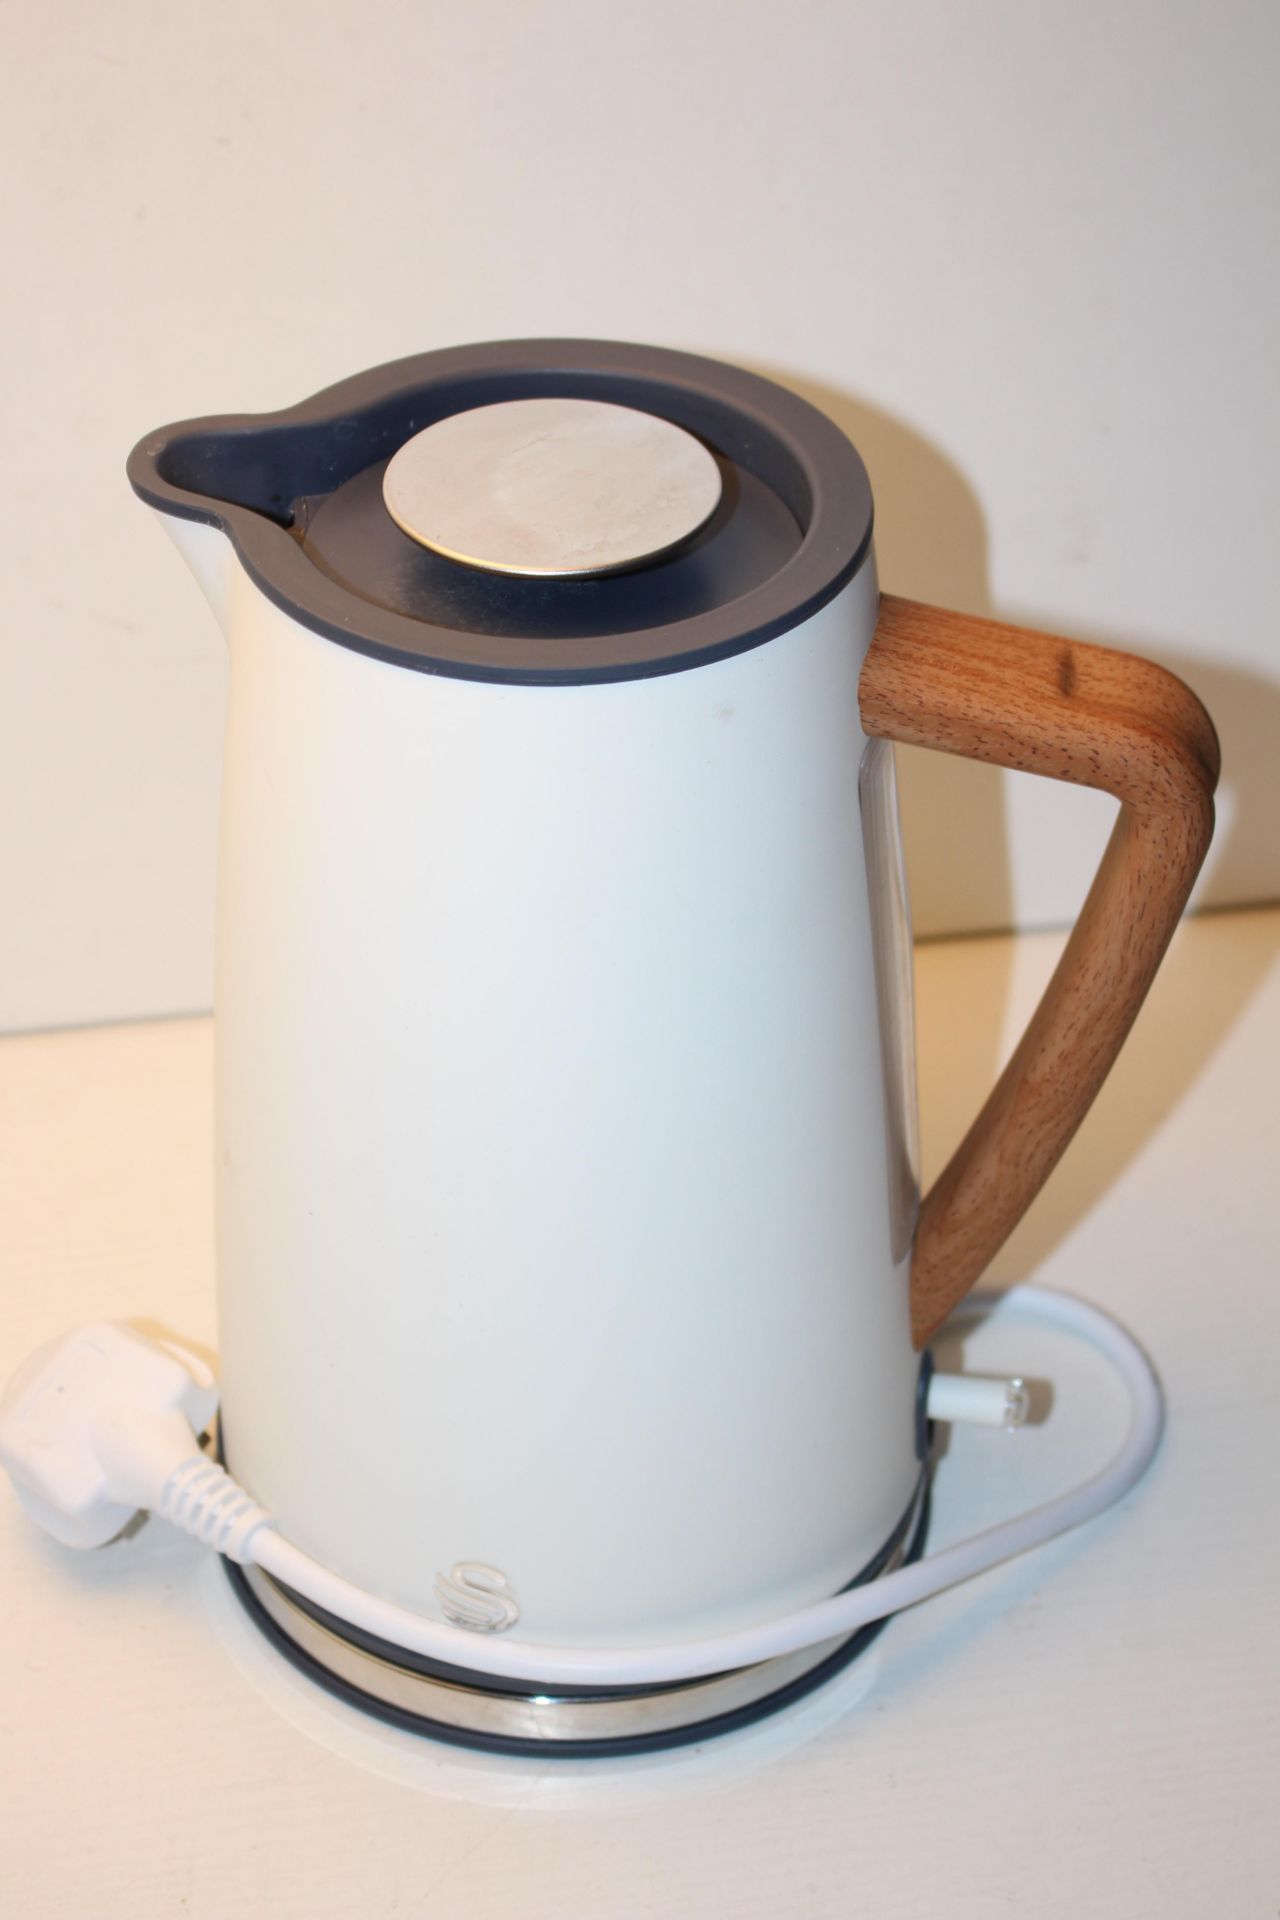 UNBOXED SWAN 1.7LITRE KETTLE RRP £29.99Condition ReportAppraisal Available on Request- All Items are